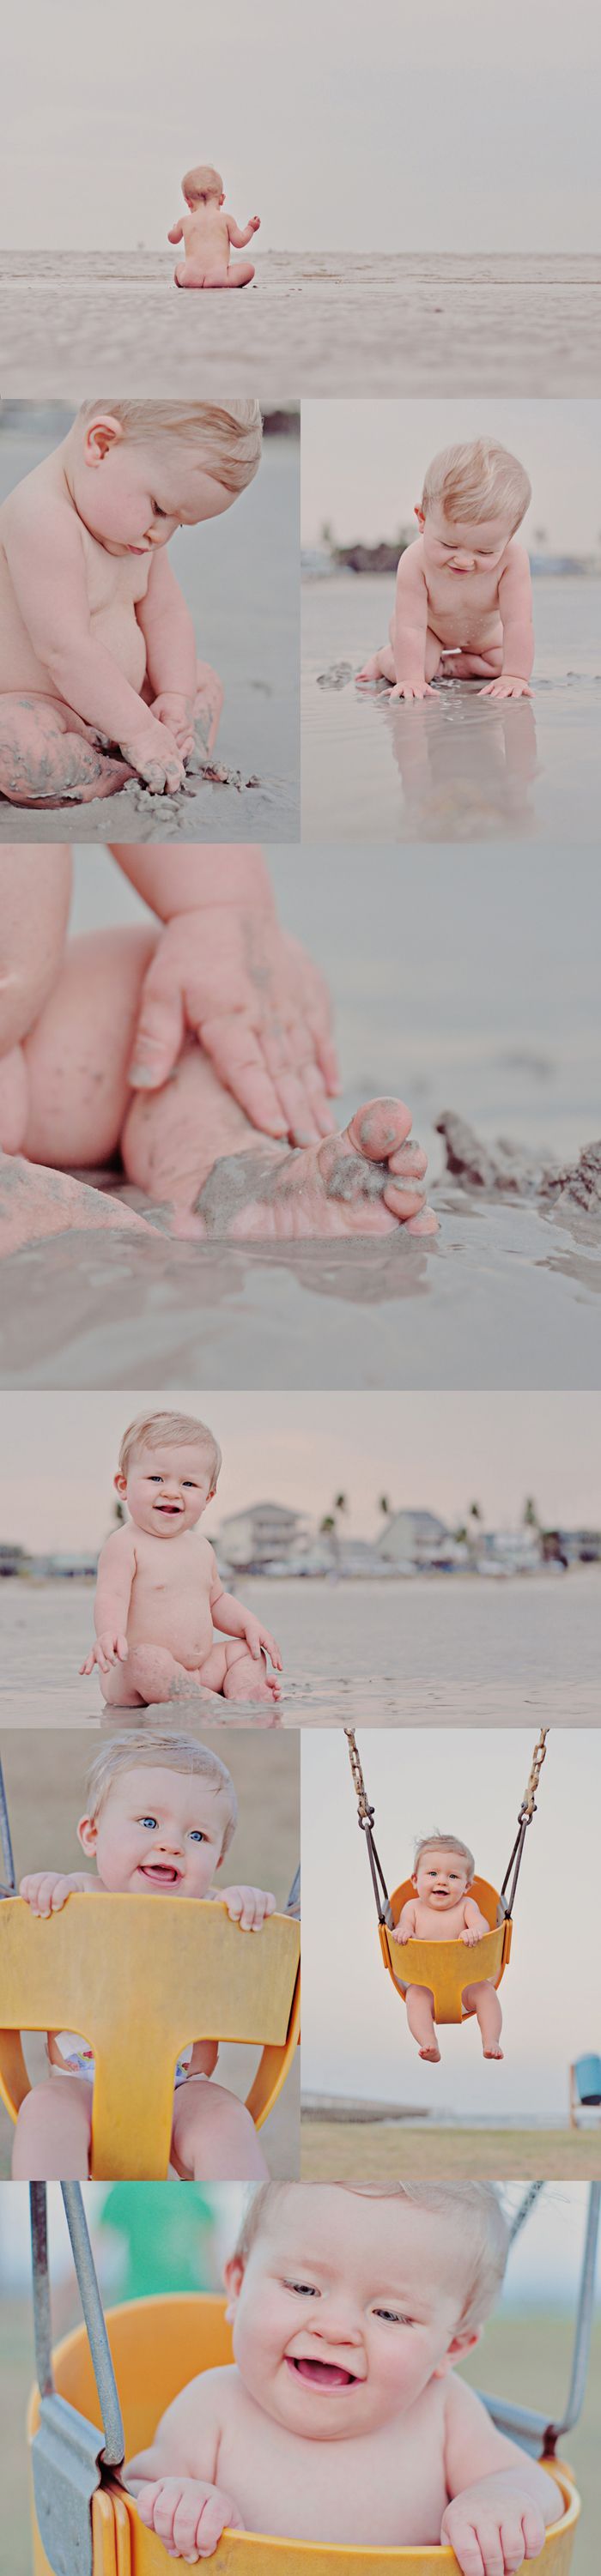 There's something about a little cubby nudie baby at the beach!